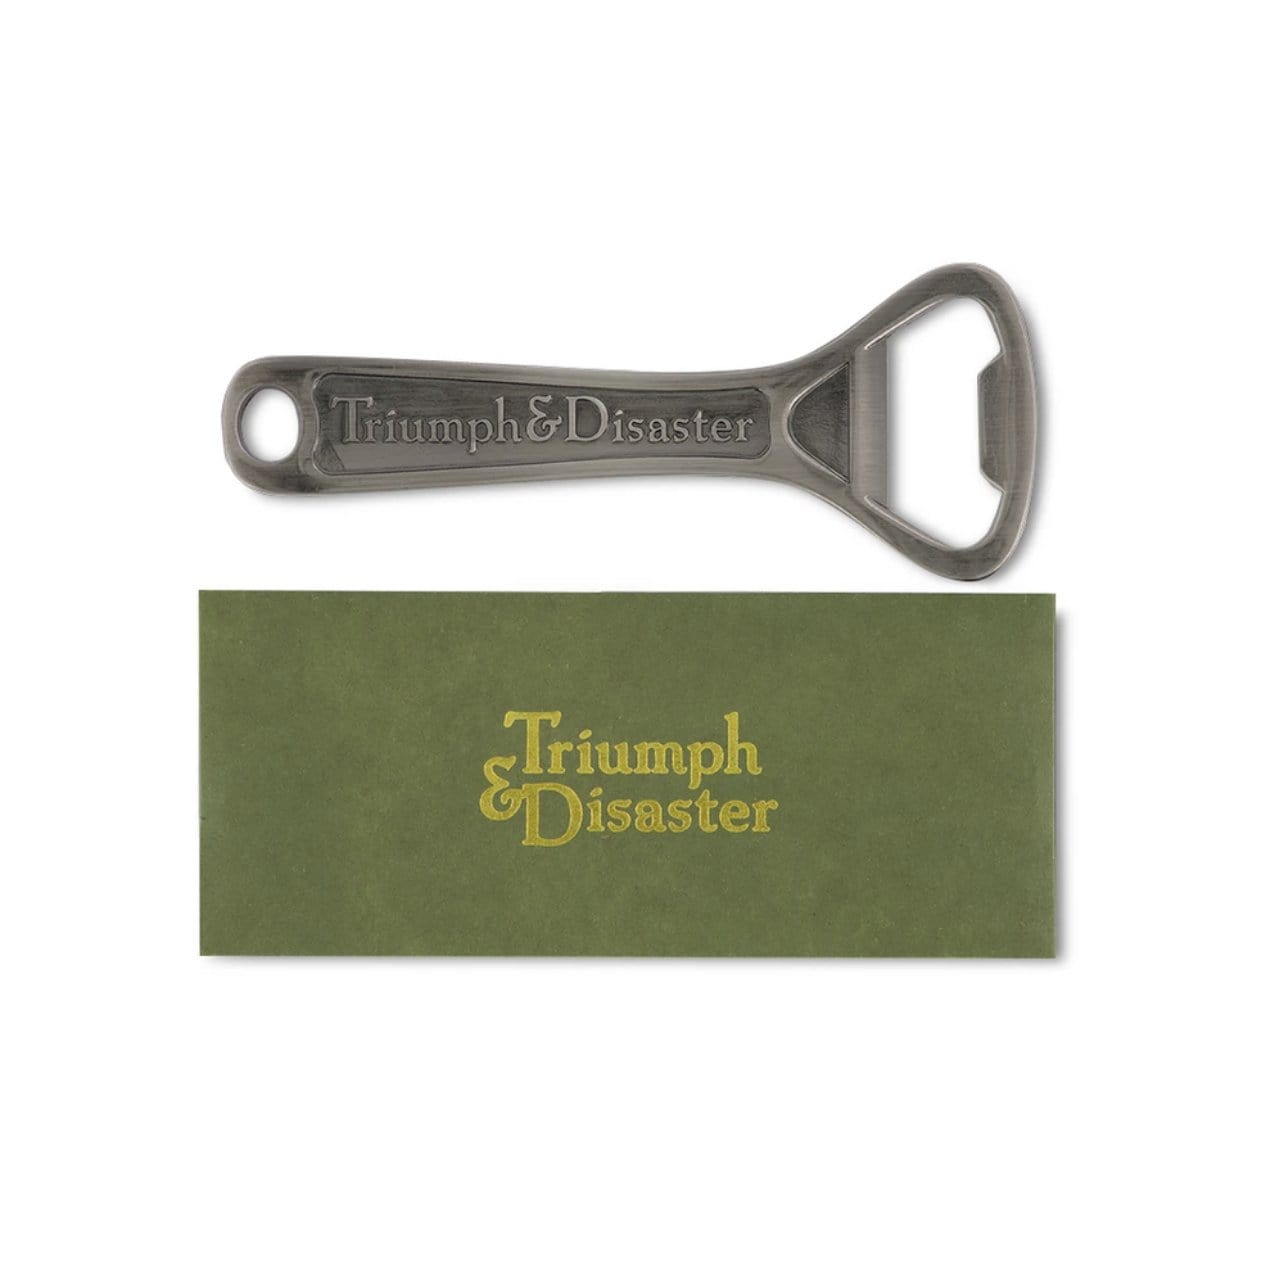 bottle opener. by Triumph & Disaster